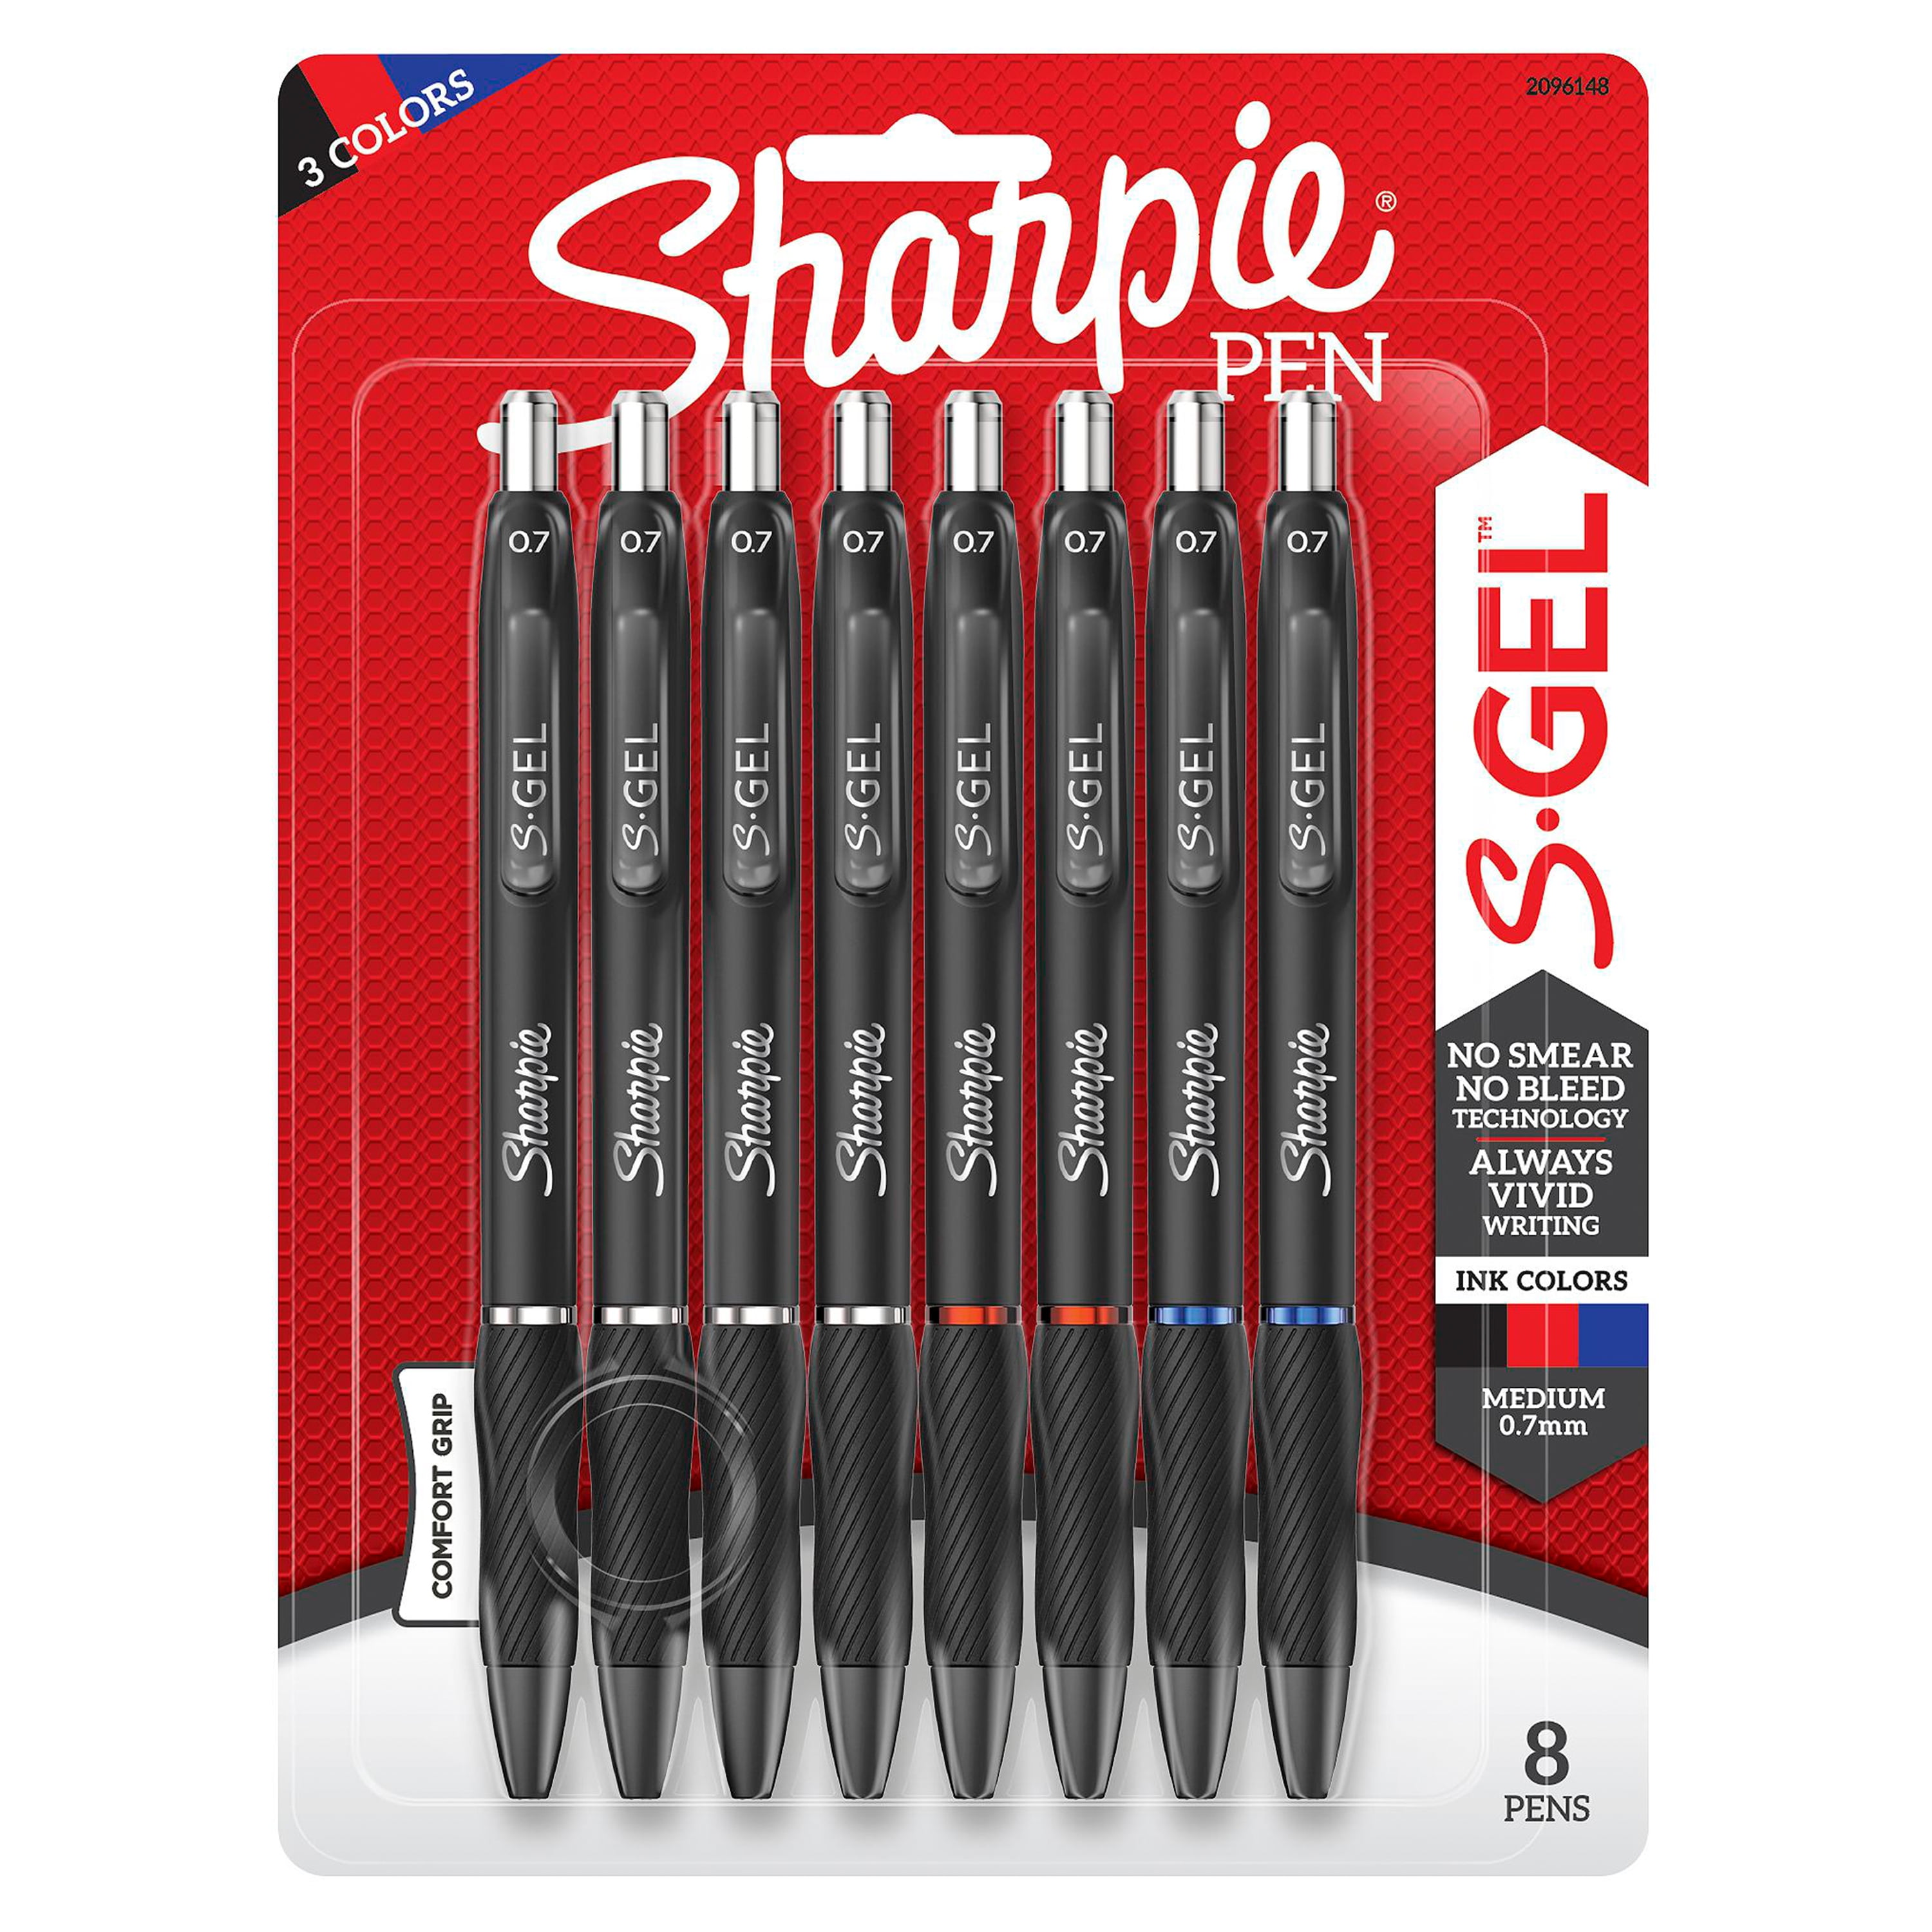 Retractable SHARPIES PERMANANT MARKER PENS Black/Blue/Red 1 2 4 6